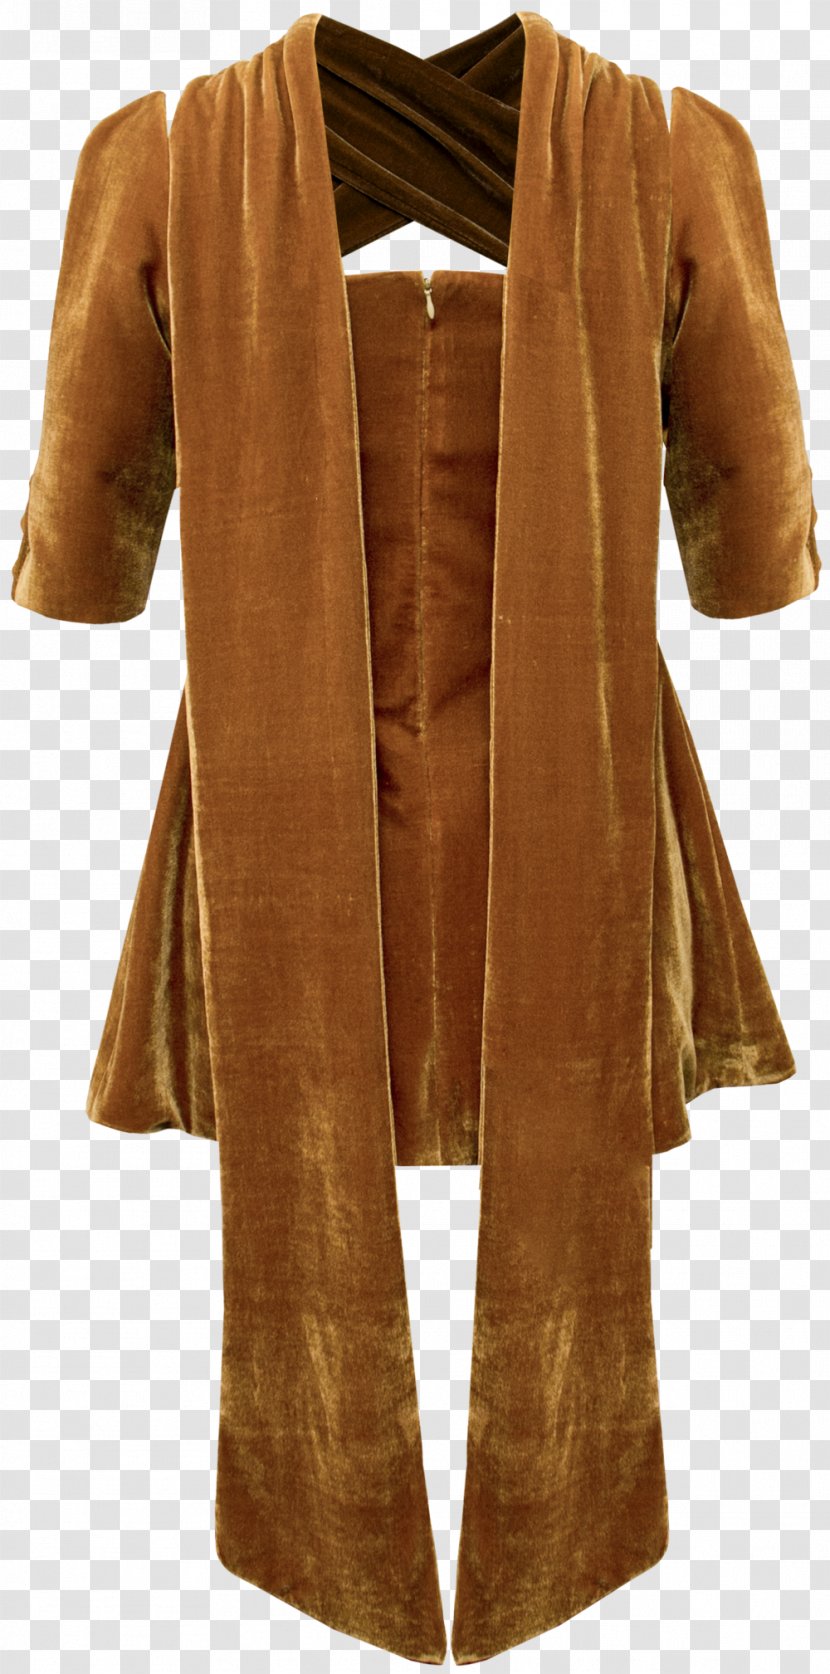 Coat - Outerwear - Look Back Transparent PNG